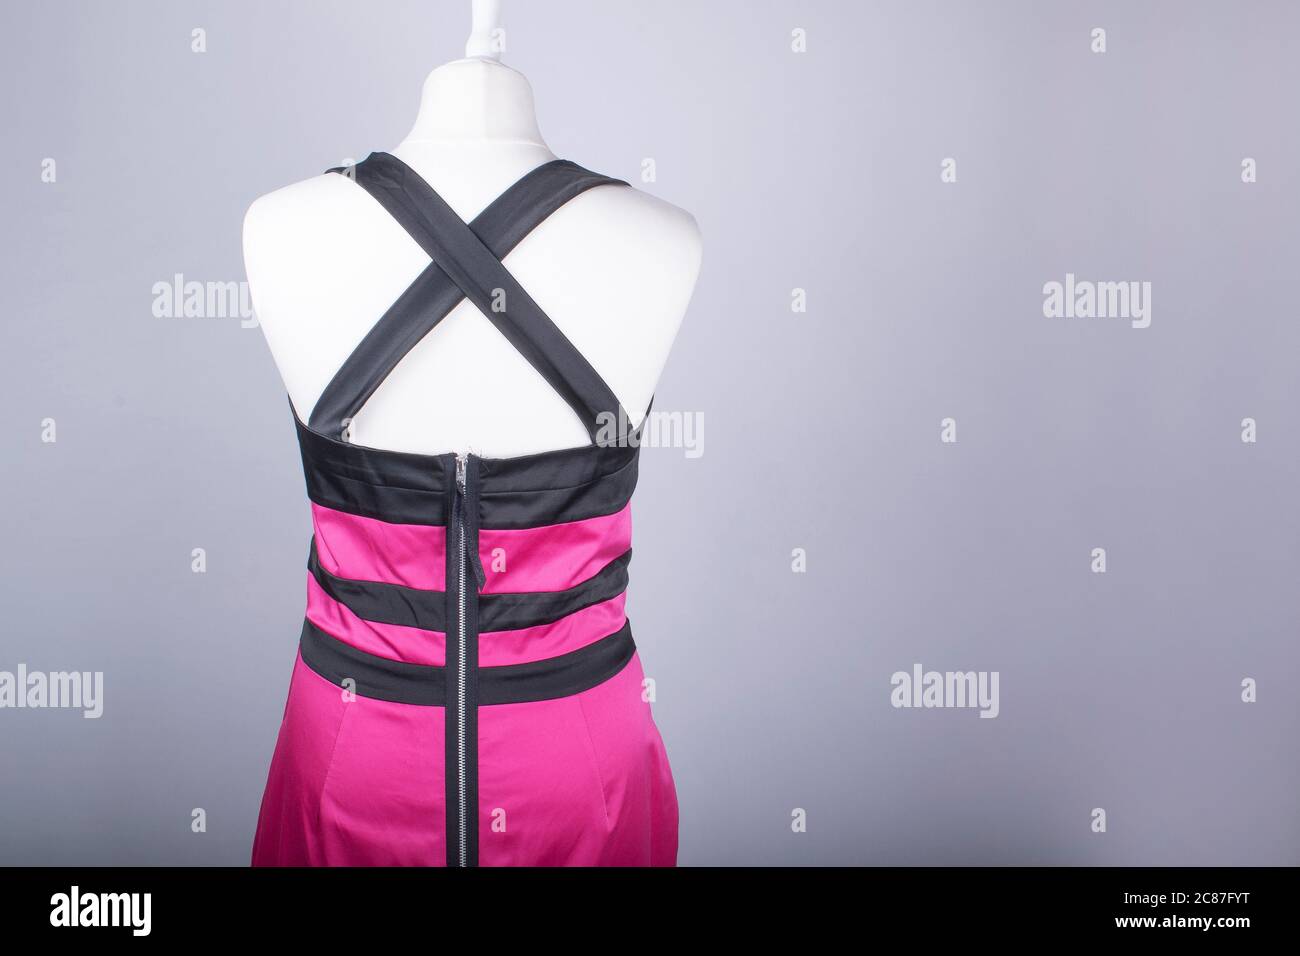 A Tailors Mannequin dressed in a Pink and Black Satin Dress Stock Photo